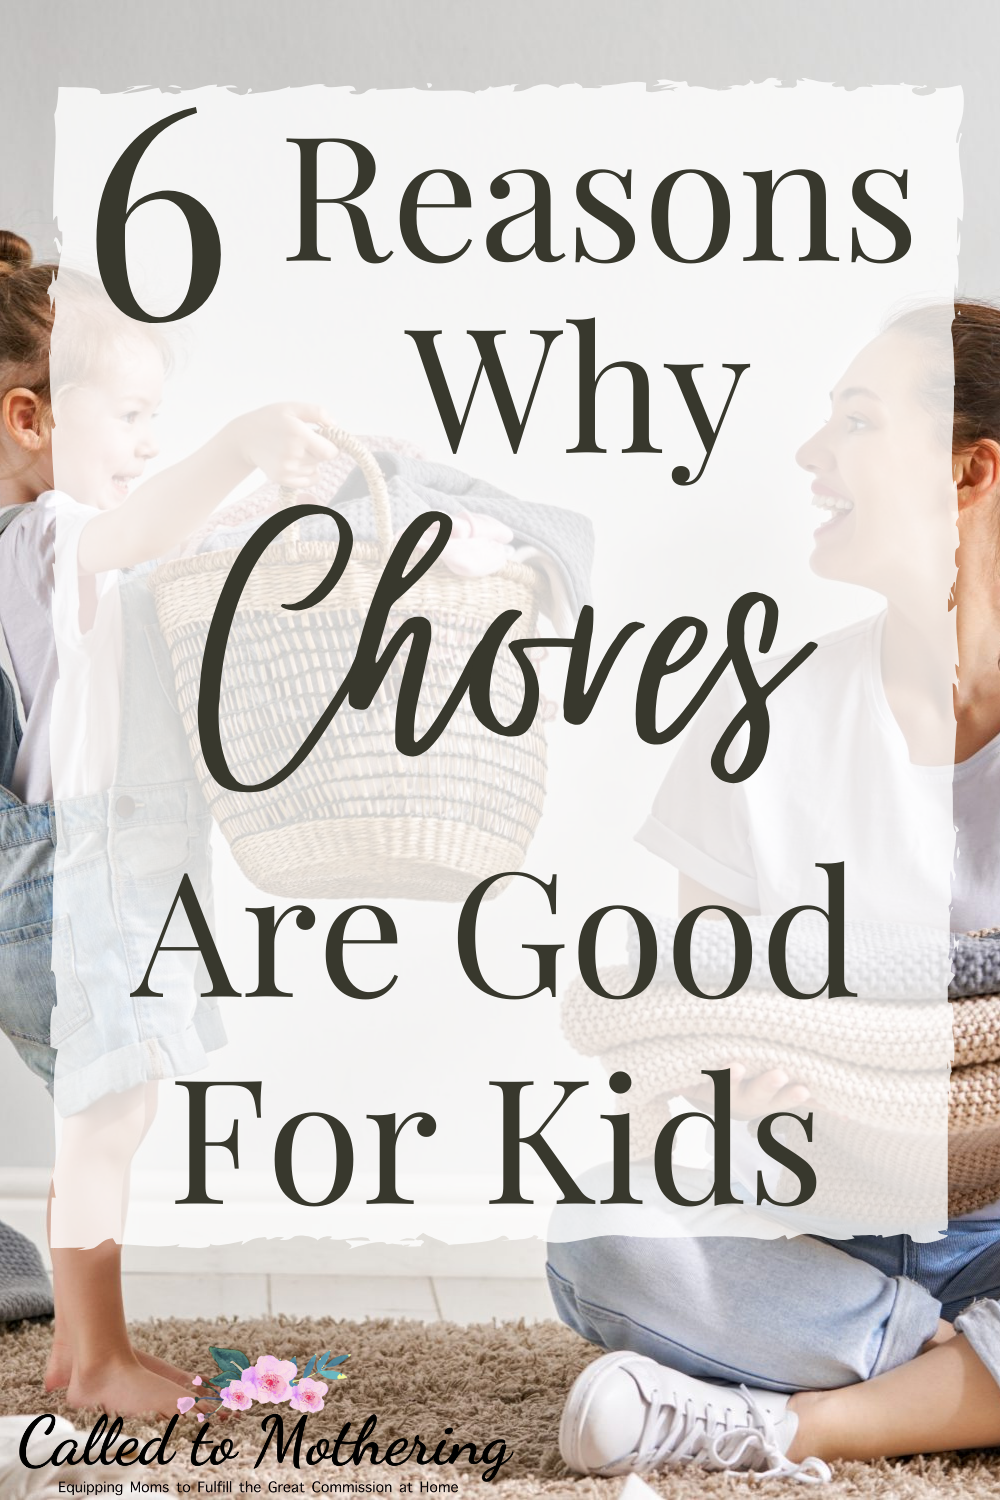 Six of the best reasons to give your kids daily chores. #chores #teachingkidsresponsibility #charactertraining